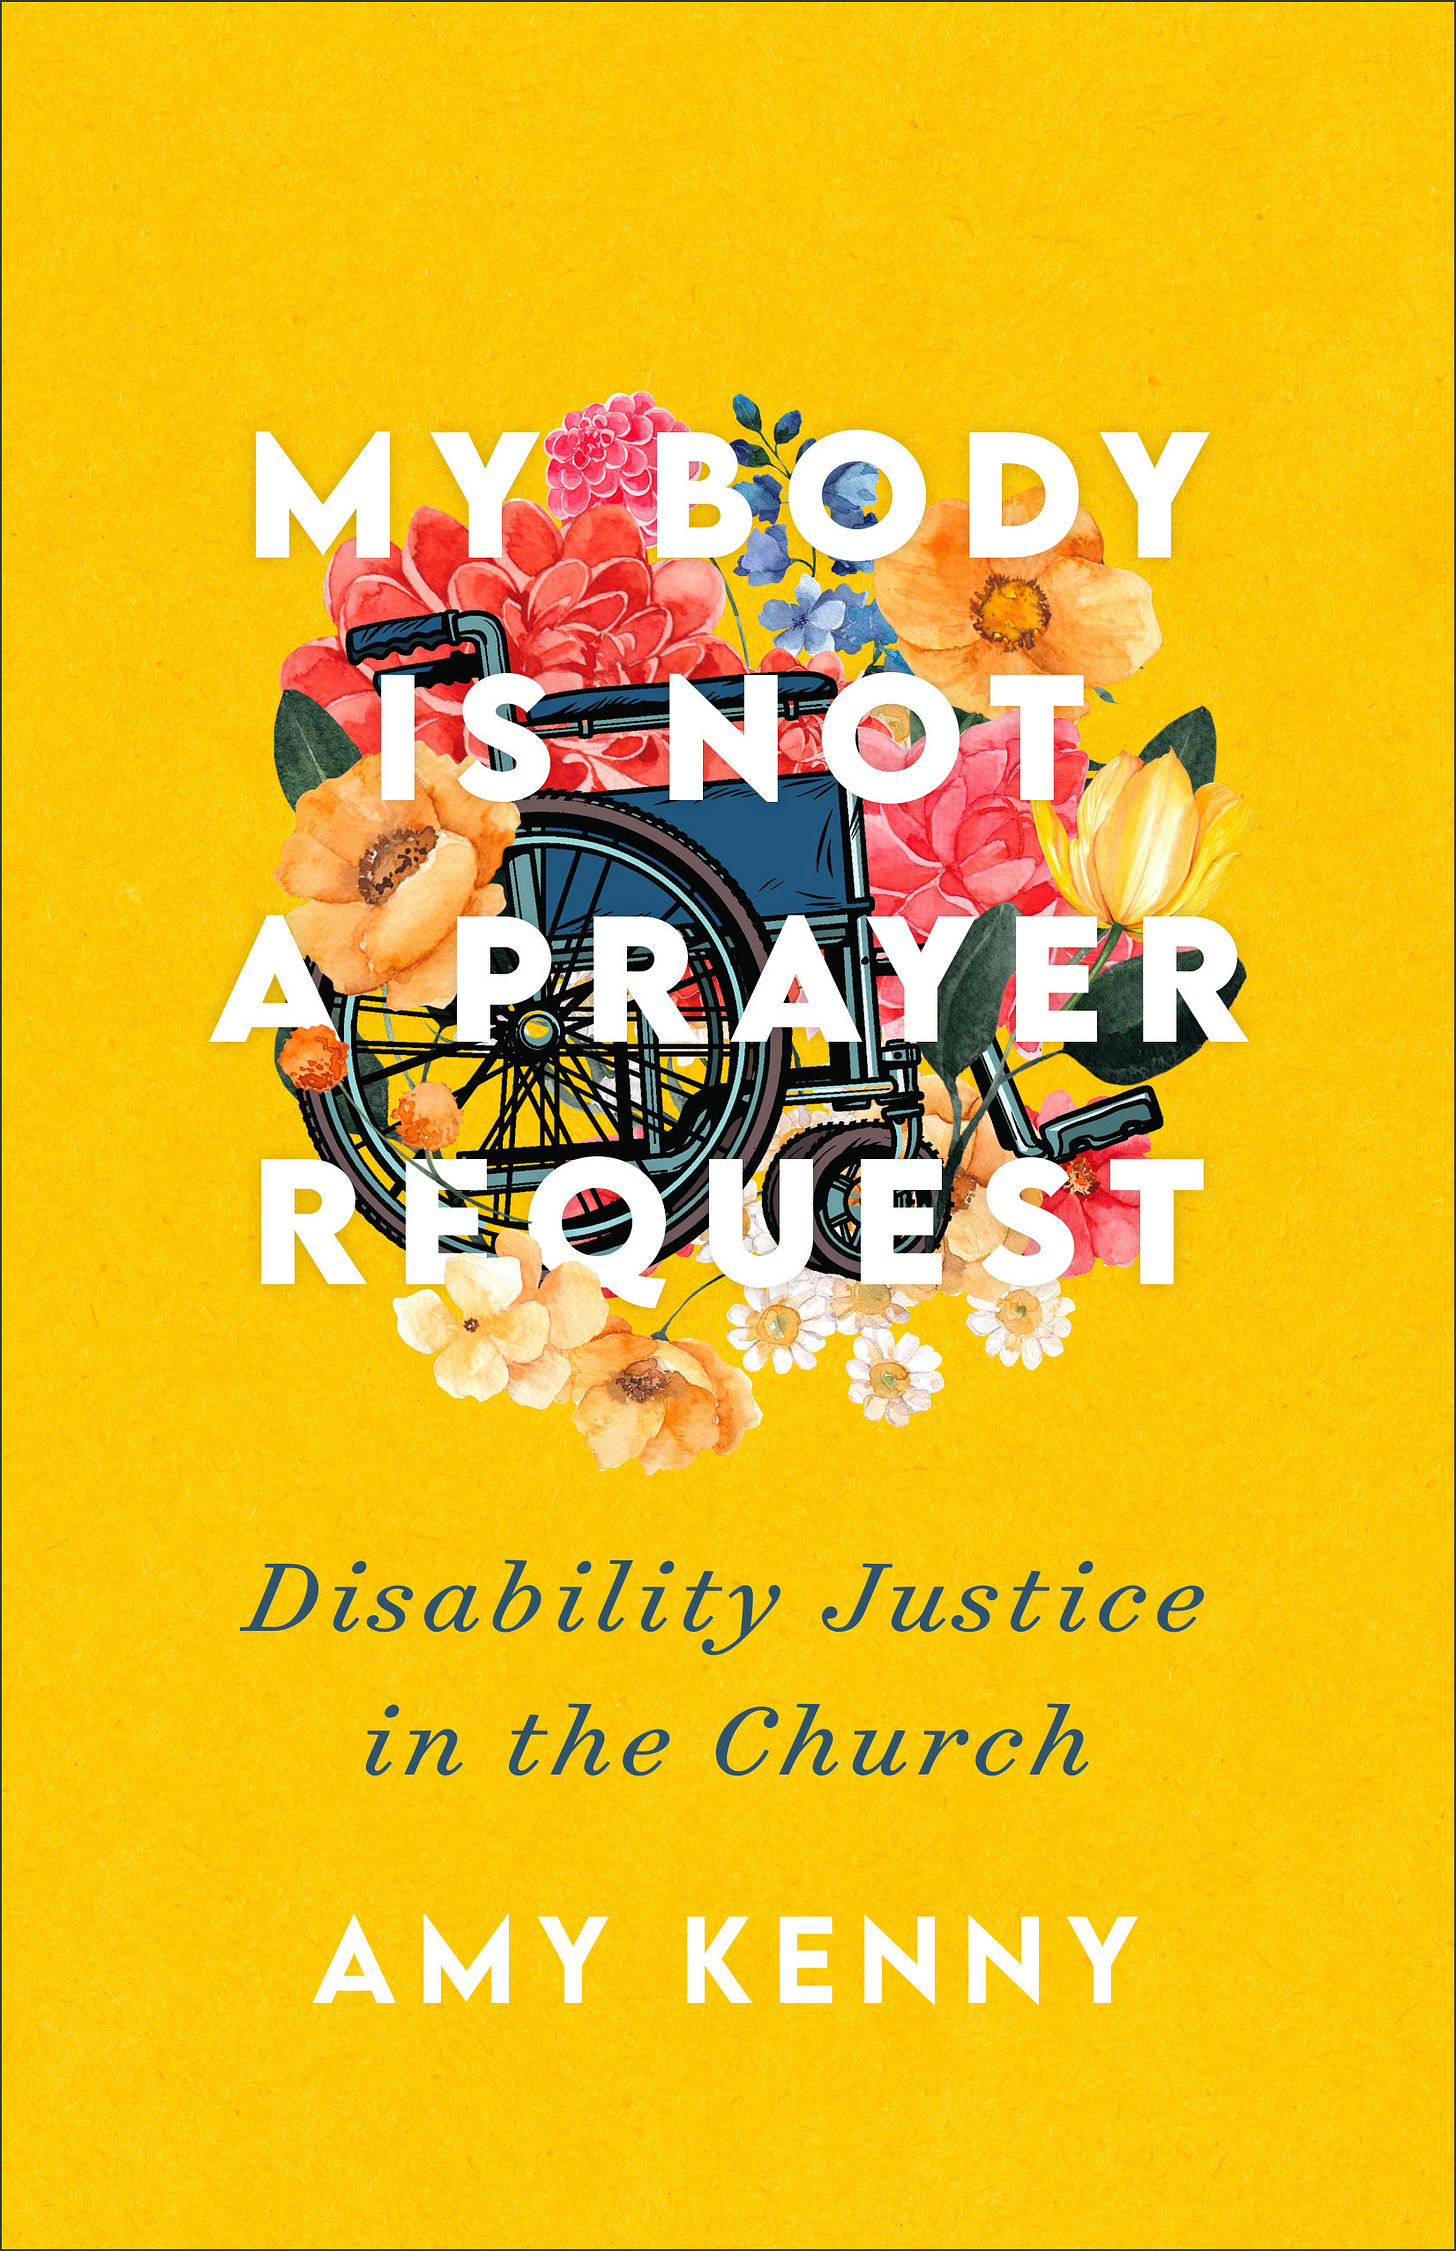 The Brazos Press cover was designed by Senior Art Director Laura Klynstra using art from Creative Market. In the middle of a yellow book cover, a wheelchair is covered in flowers and letters that read: ‘My Body is Not A Prayer Request Disability Justice in the Church by Amy Kenny.’ The flowers are an assortment of colors including pink, blue, orange, and yellow. The flowers grow in and around the wheelchair, creating a bouquet.